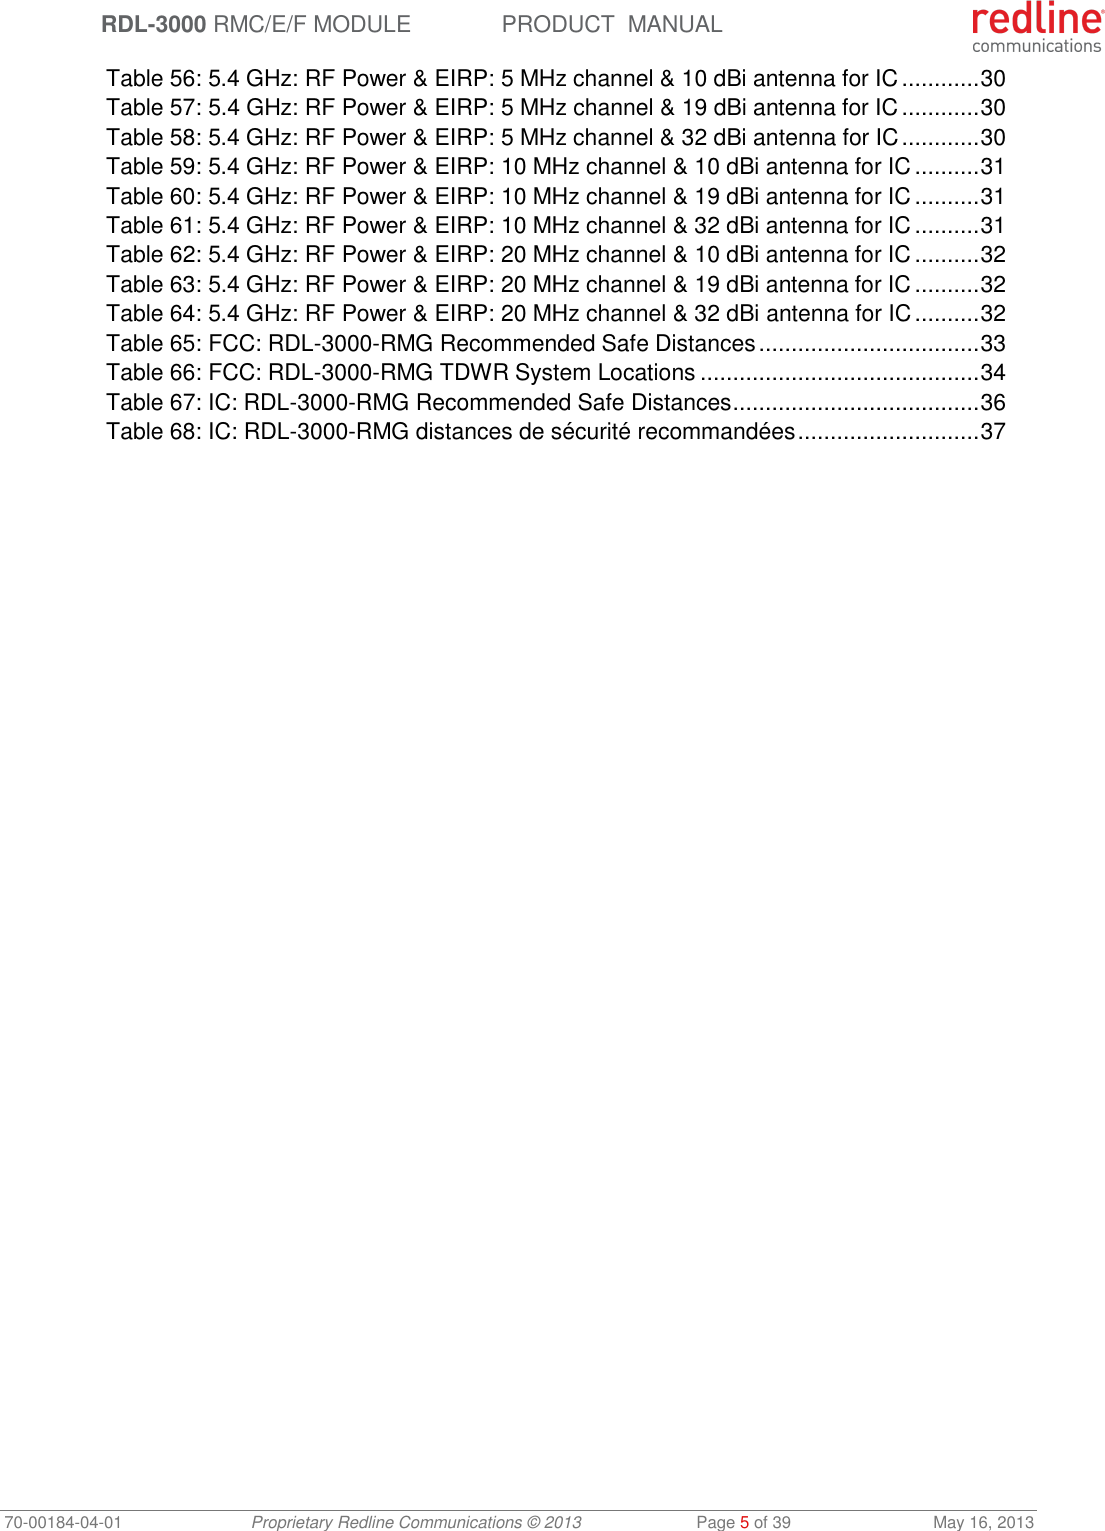  RDL-3000 RMC/E/F MODULE PRODUCT  MANUAL 70-00184-04-01 Proprietary Redline Communications © 2013  Page 5 of 39  May 16, 2013 Table 56: 5.4 GHz: RF Power &amp; EIRP: 5 MHz channel &amp; 10 dBi antenna for IC ............ 30 Table 57: 5.4 GHz: RF Power &amp; EIRP: 5 MHz channel &amp; 19 dBi antenna for IC ............ 30 Table 58: 5.4 GHz: RF Power &amp; EIRP: 5 MHz channel &amp; 32 dBi antenna for IC ............ 30 Table 59: 5.4 GHz: RF Power &amp; EIRP: 10 MHz channel &amp; 10 dBi antenna for IC .......... 31 Table 60: 5.4 GHz: RF Power &amp; EIRP: 10 MHz channel &amp; 19 dBi antenna for IC .......... 31 Table 61: 5.4 GHz: RF Power &amp; EIRP: 10 MHz channel &amp; 32 dBi antenna for IC .......... 31 Table 62: 5.4 GHz: RF Power &amp; EIRP: 20 MHz channel &amp; 10 dBi antenna for IC .......... 32 Table 63: 5.4 GHz: RF Power &amp; EIRP: 20 MHz channel &amp; 19 dBi antenna for IC .......... 32 Table 64: 5.4 GHz: RF Power &amp; EIRP: 20 MHz channel &amp; 32 dBi antenna for IC .......... 32 Table 65: FCC: RDL-3000-RMG Recommended Safe Distances .................................. 33 Table 66: FCC: RDL-3000-RMG TDWR System Locations ........................................... 34 Table 67: IC: RDL-3000-RMG Recommended Safe Distances ...................................... 36 Table 68: IC: RDL-3000-RMG distances de sécurité recommandées ............................ 37 